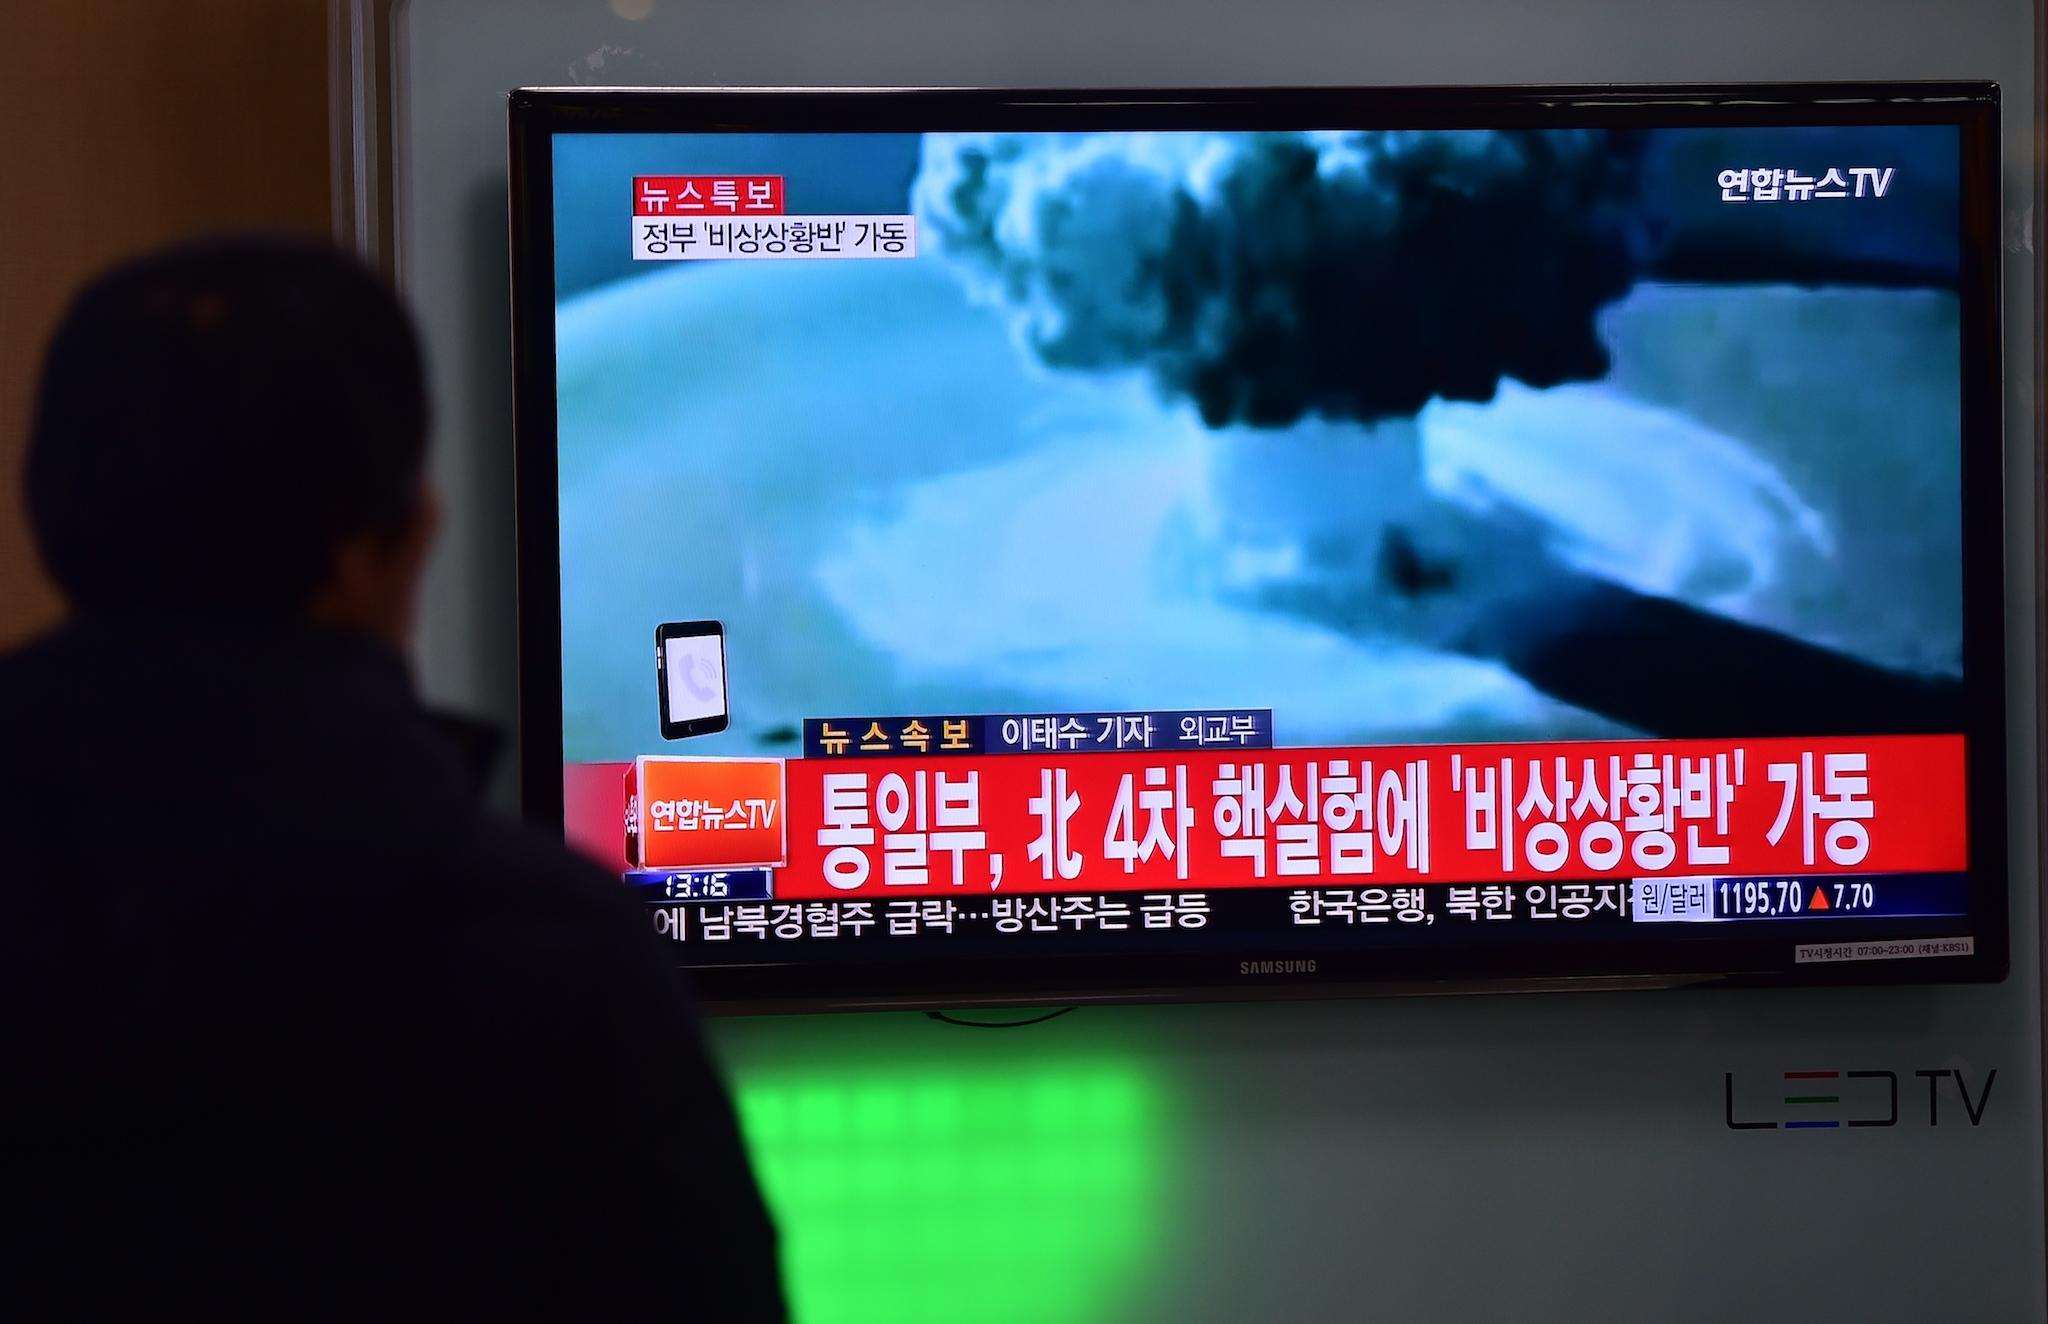 People watch a news report on North Korea's first hydrogen bomb test at a railroad station in Seoul on January 6, 2016